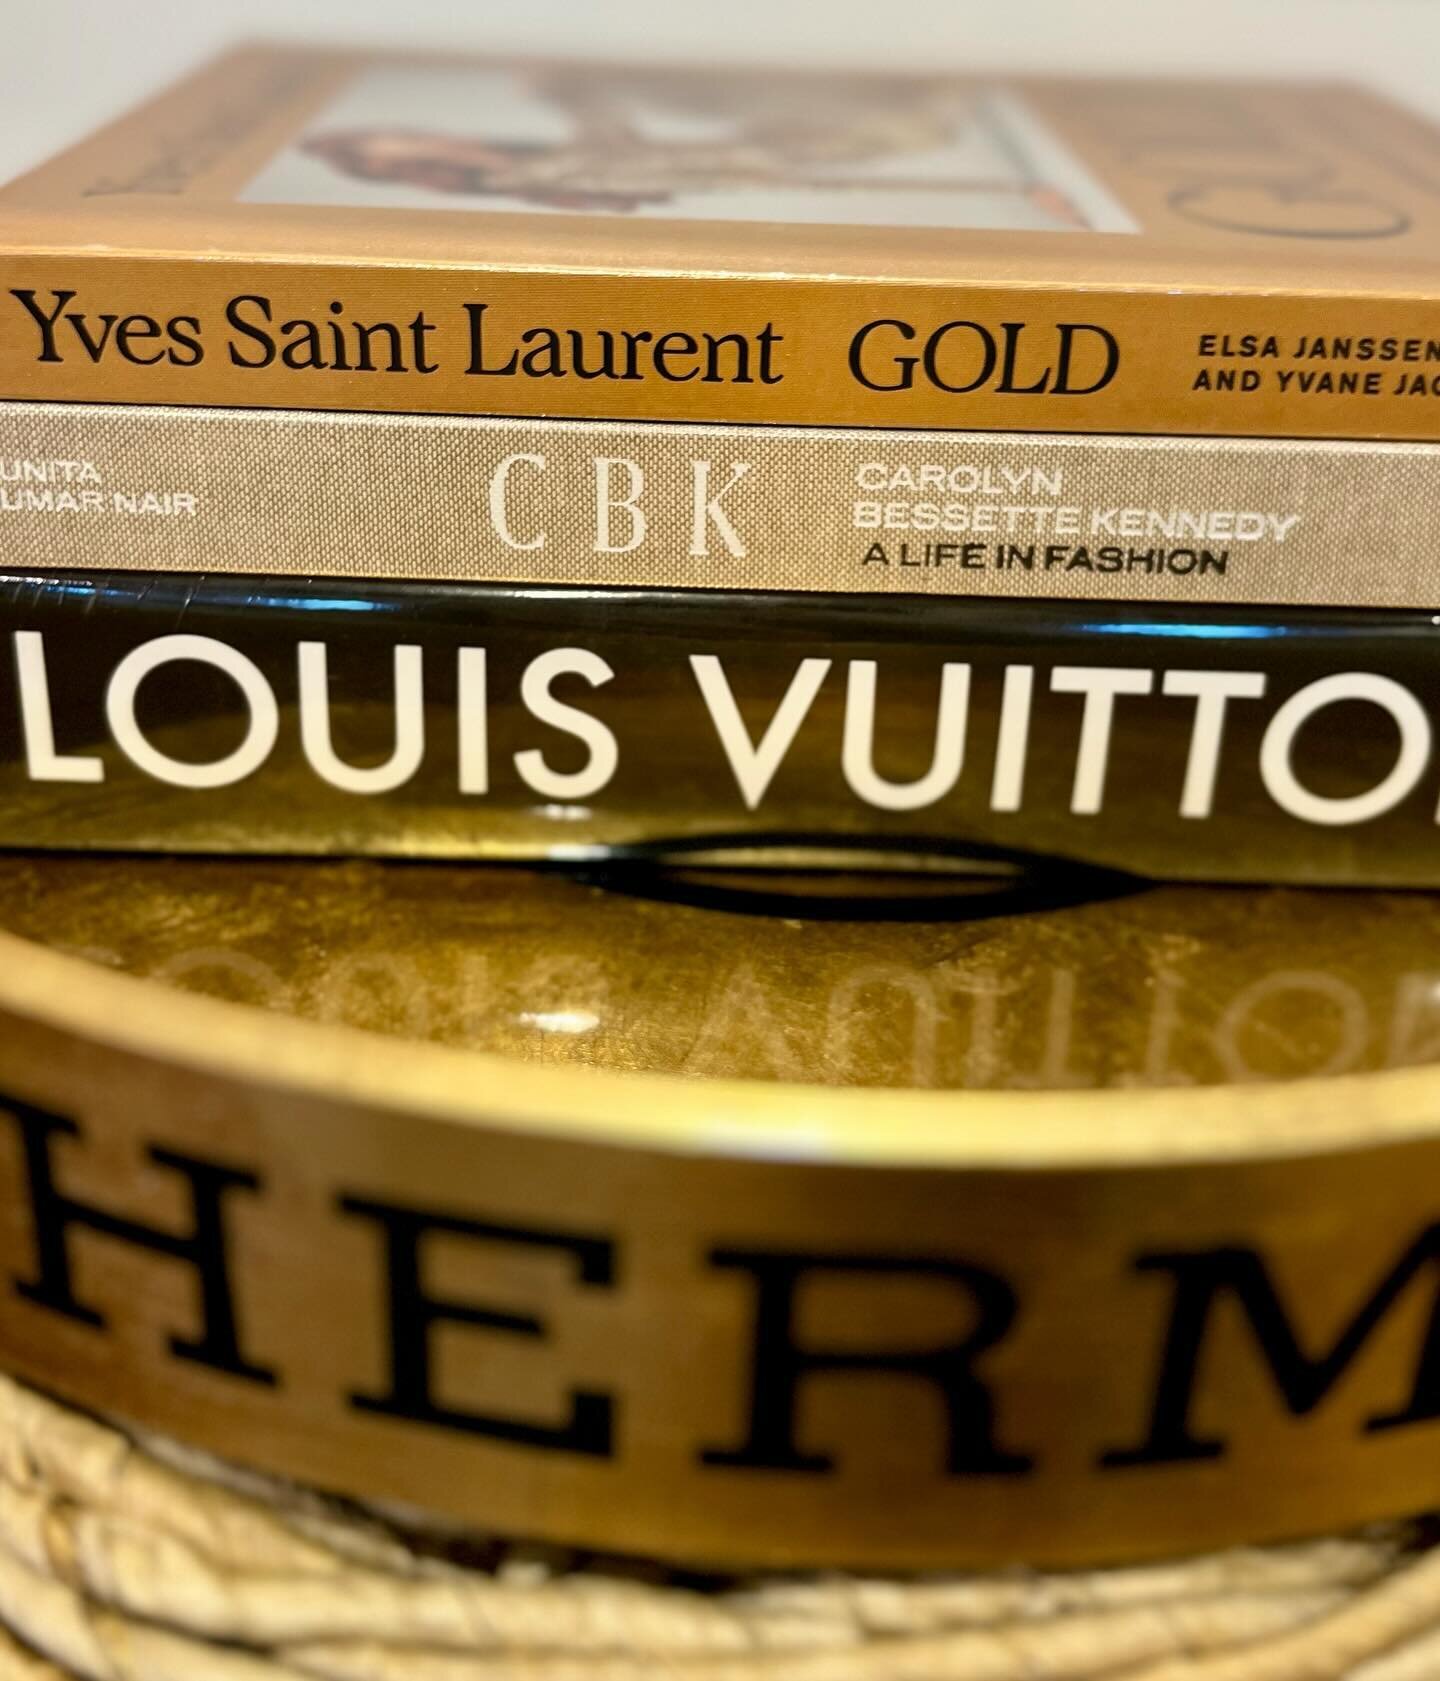 What are YOU stacking on your gorgeous new designer tray&hellip;#coffeetablebooks #louisvuitton #dior #cbk #carolynbessettekennedy #decor #trays #luxelivingroom #books #saylavie